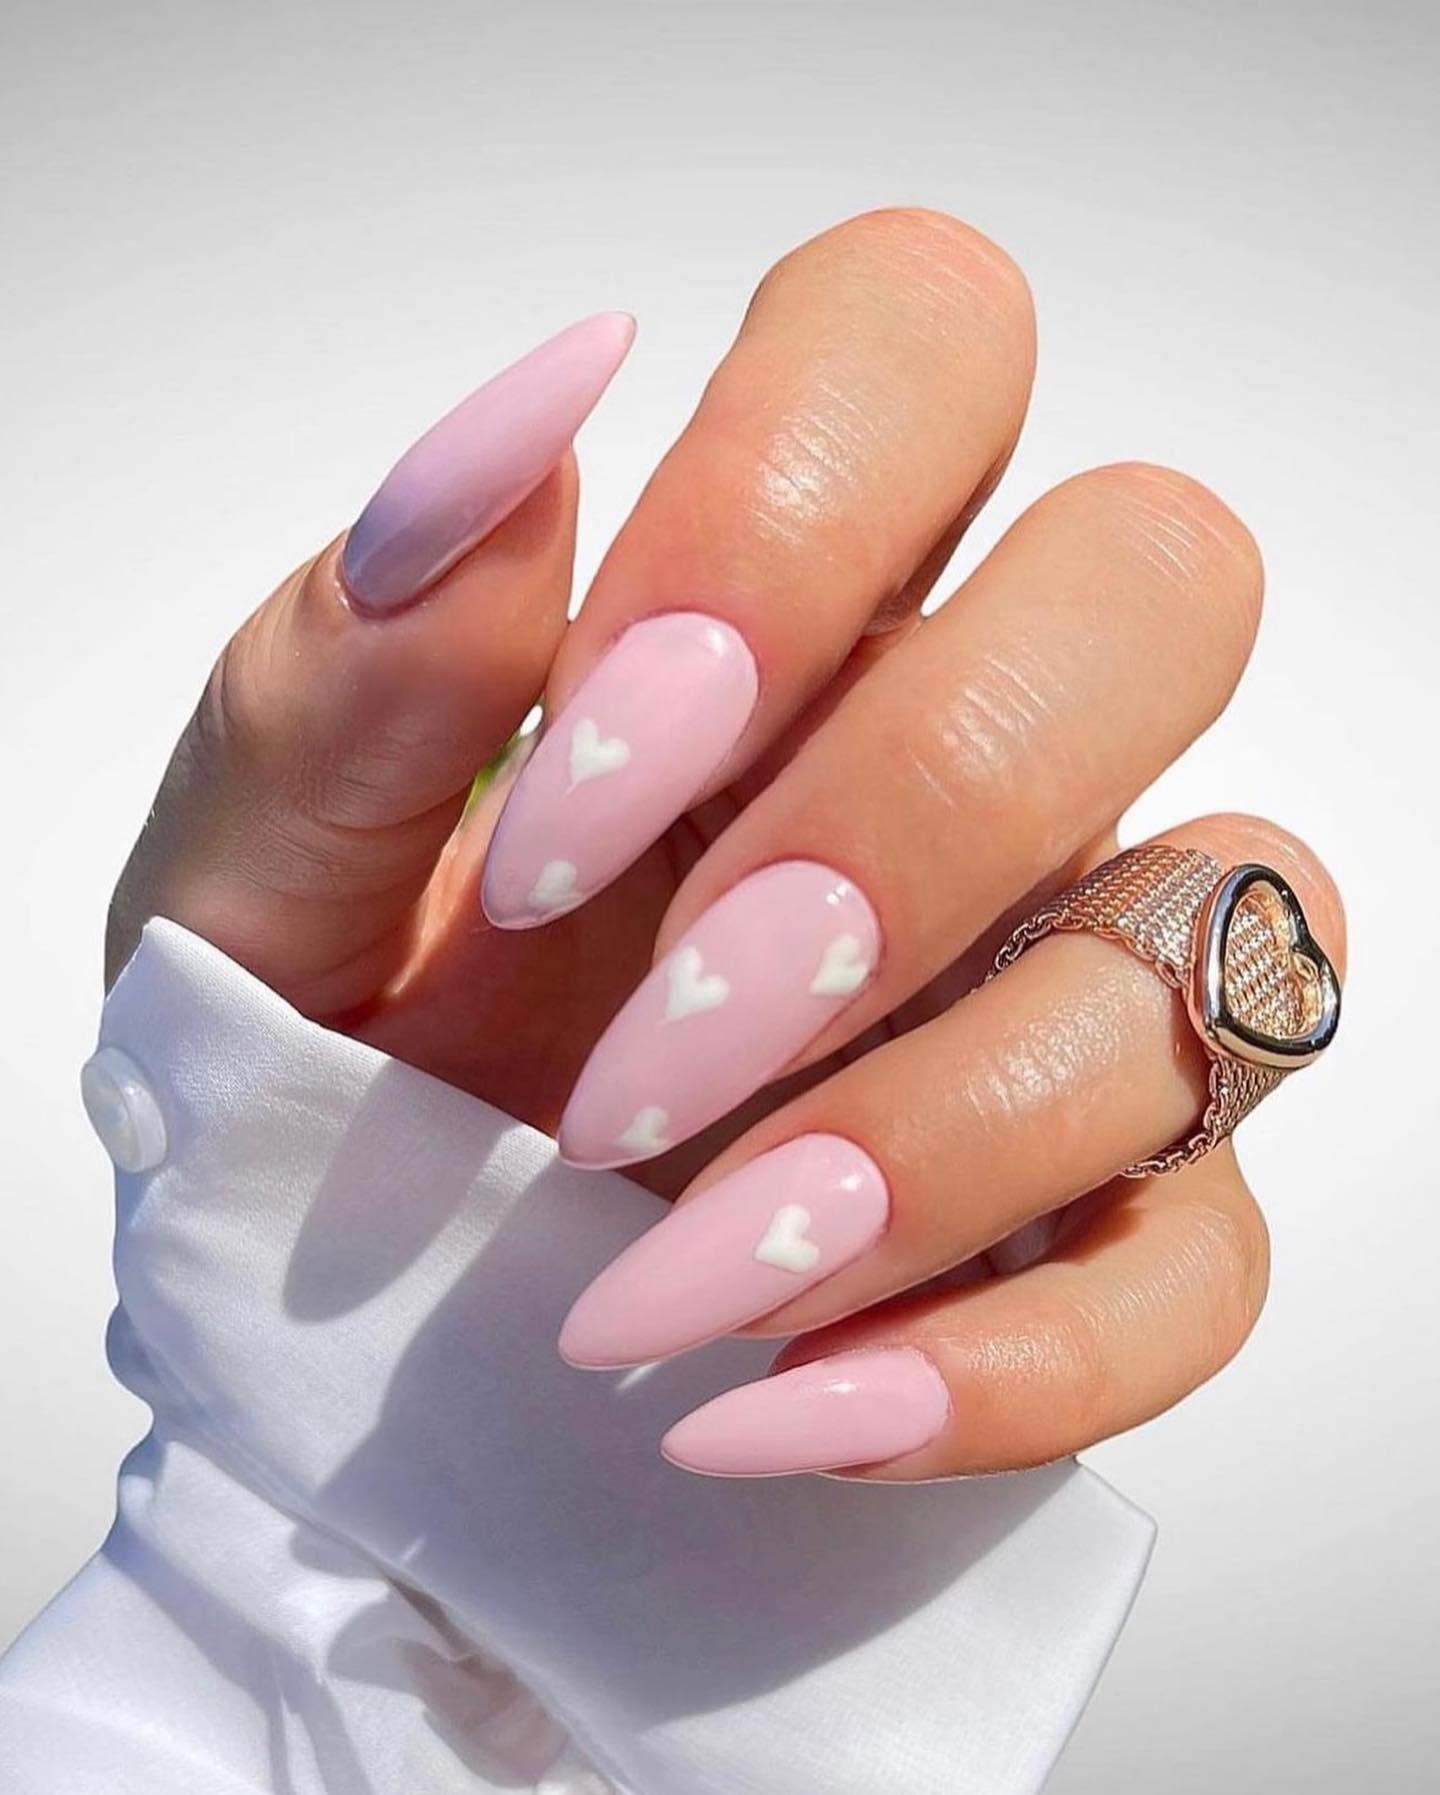 100 Of The Best Spring Inspired Nail Designs images 6